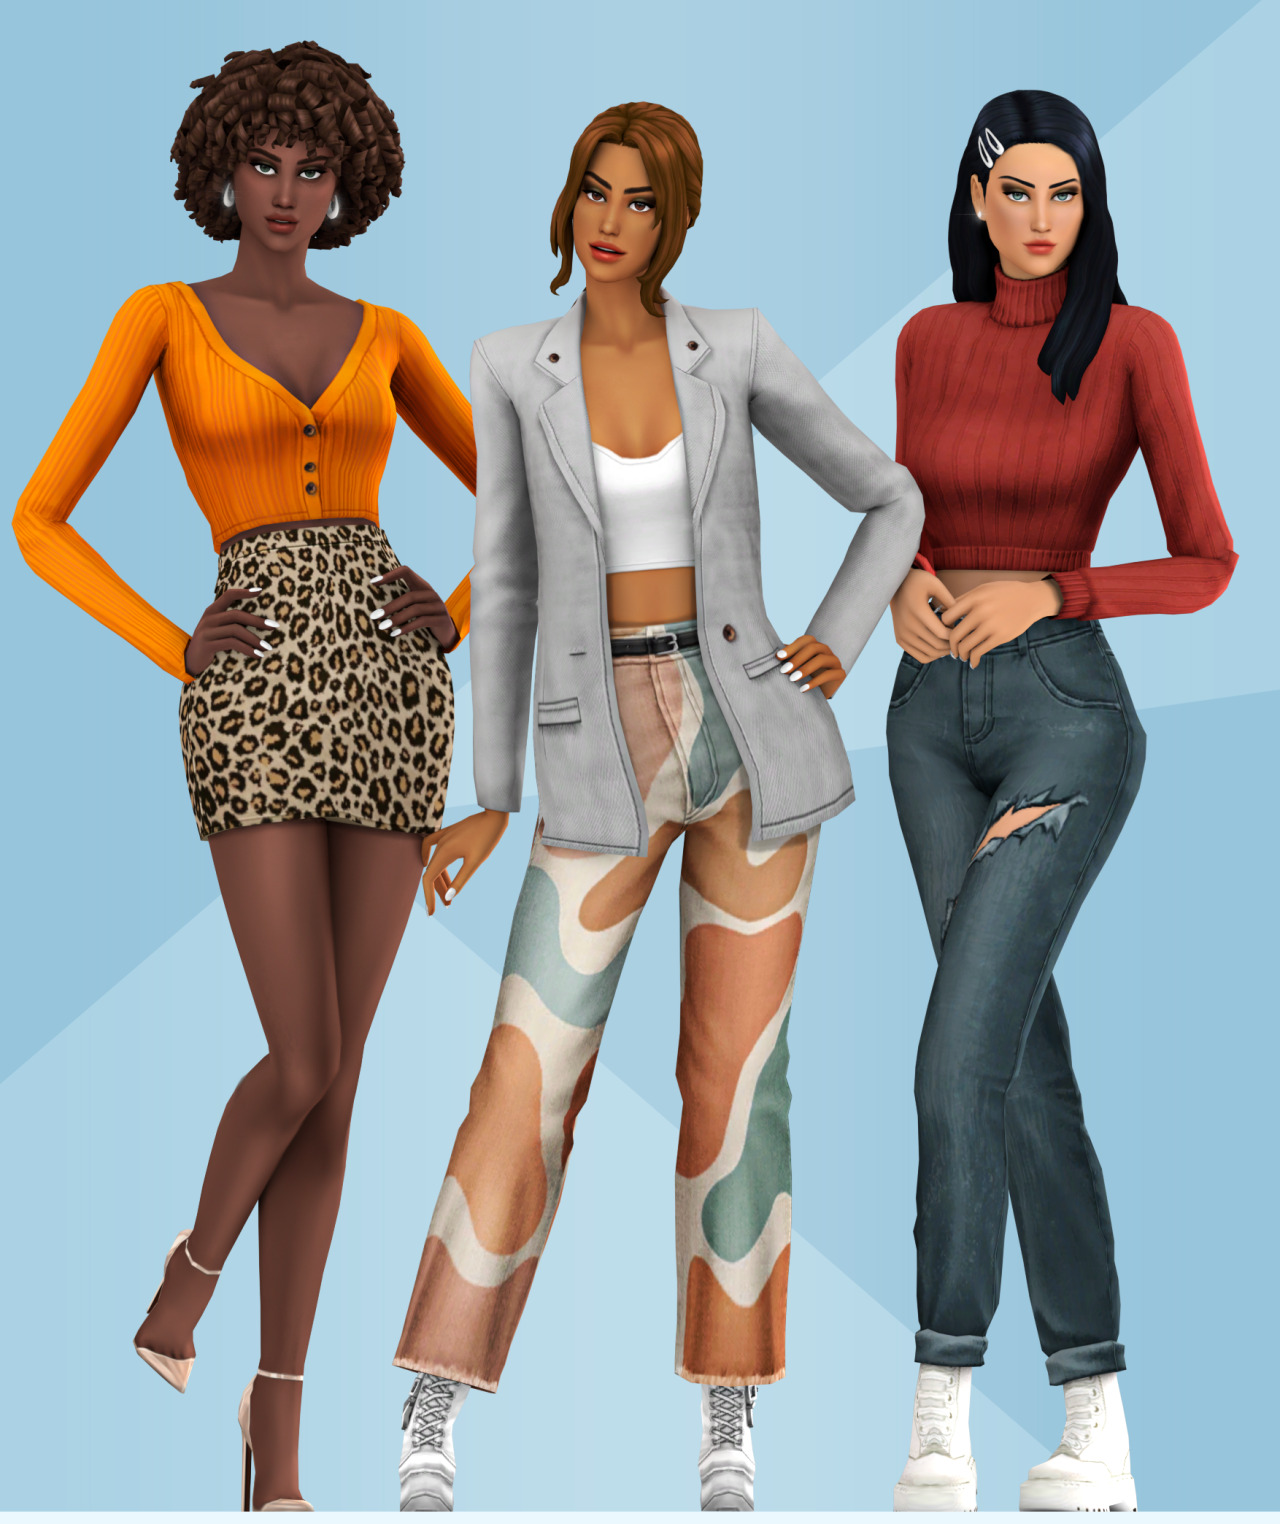 sims 4 mods download 2021